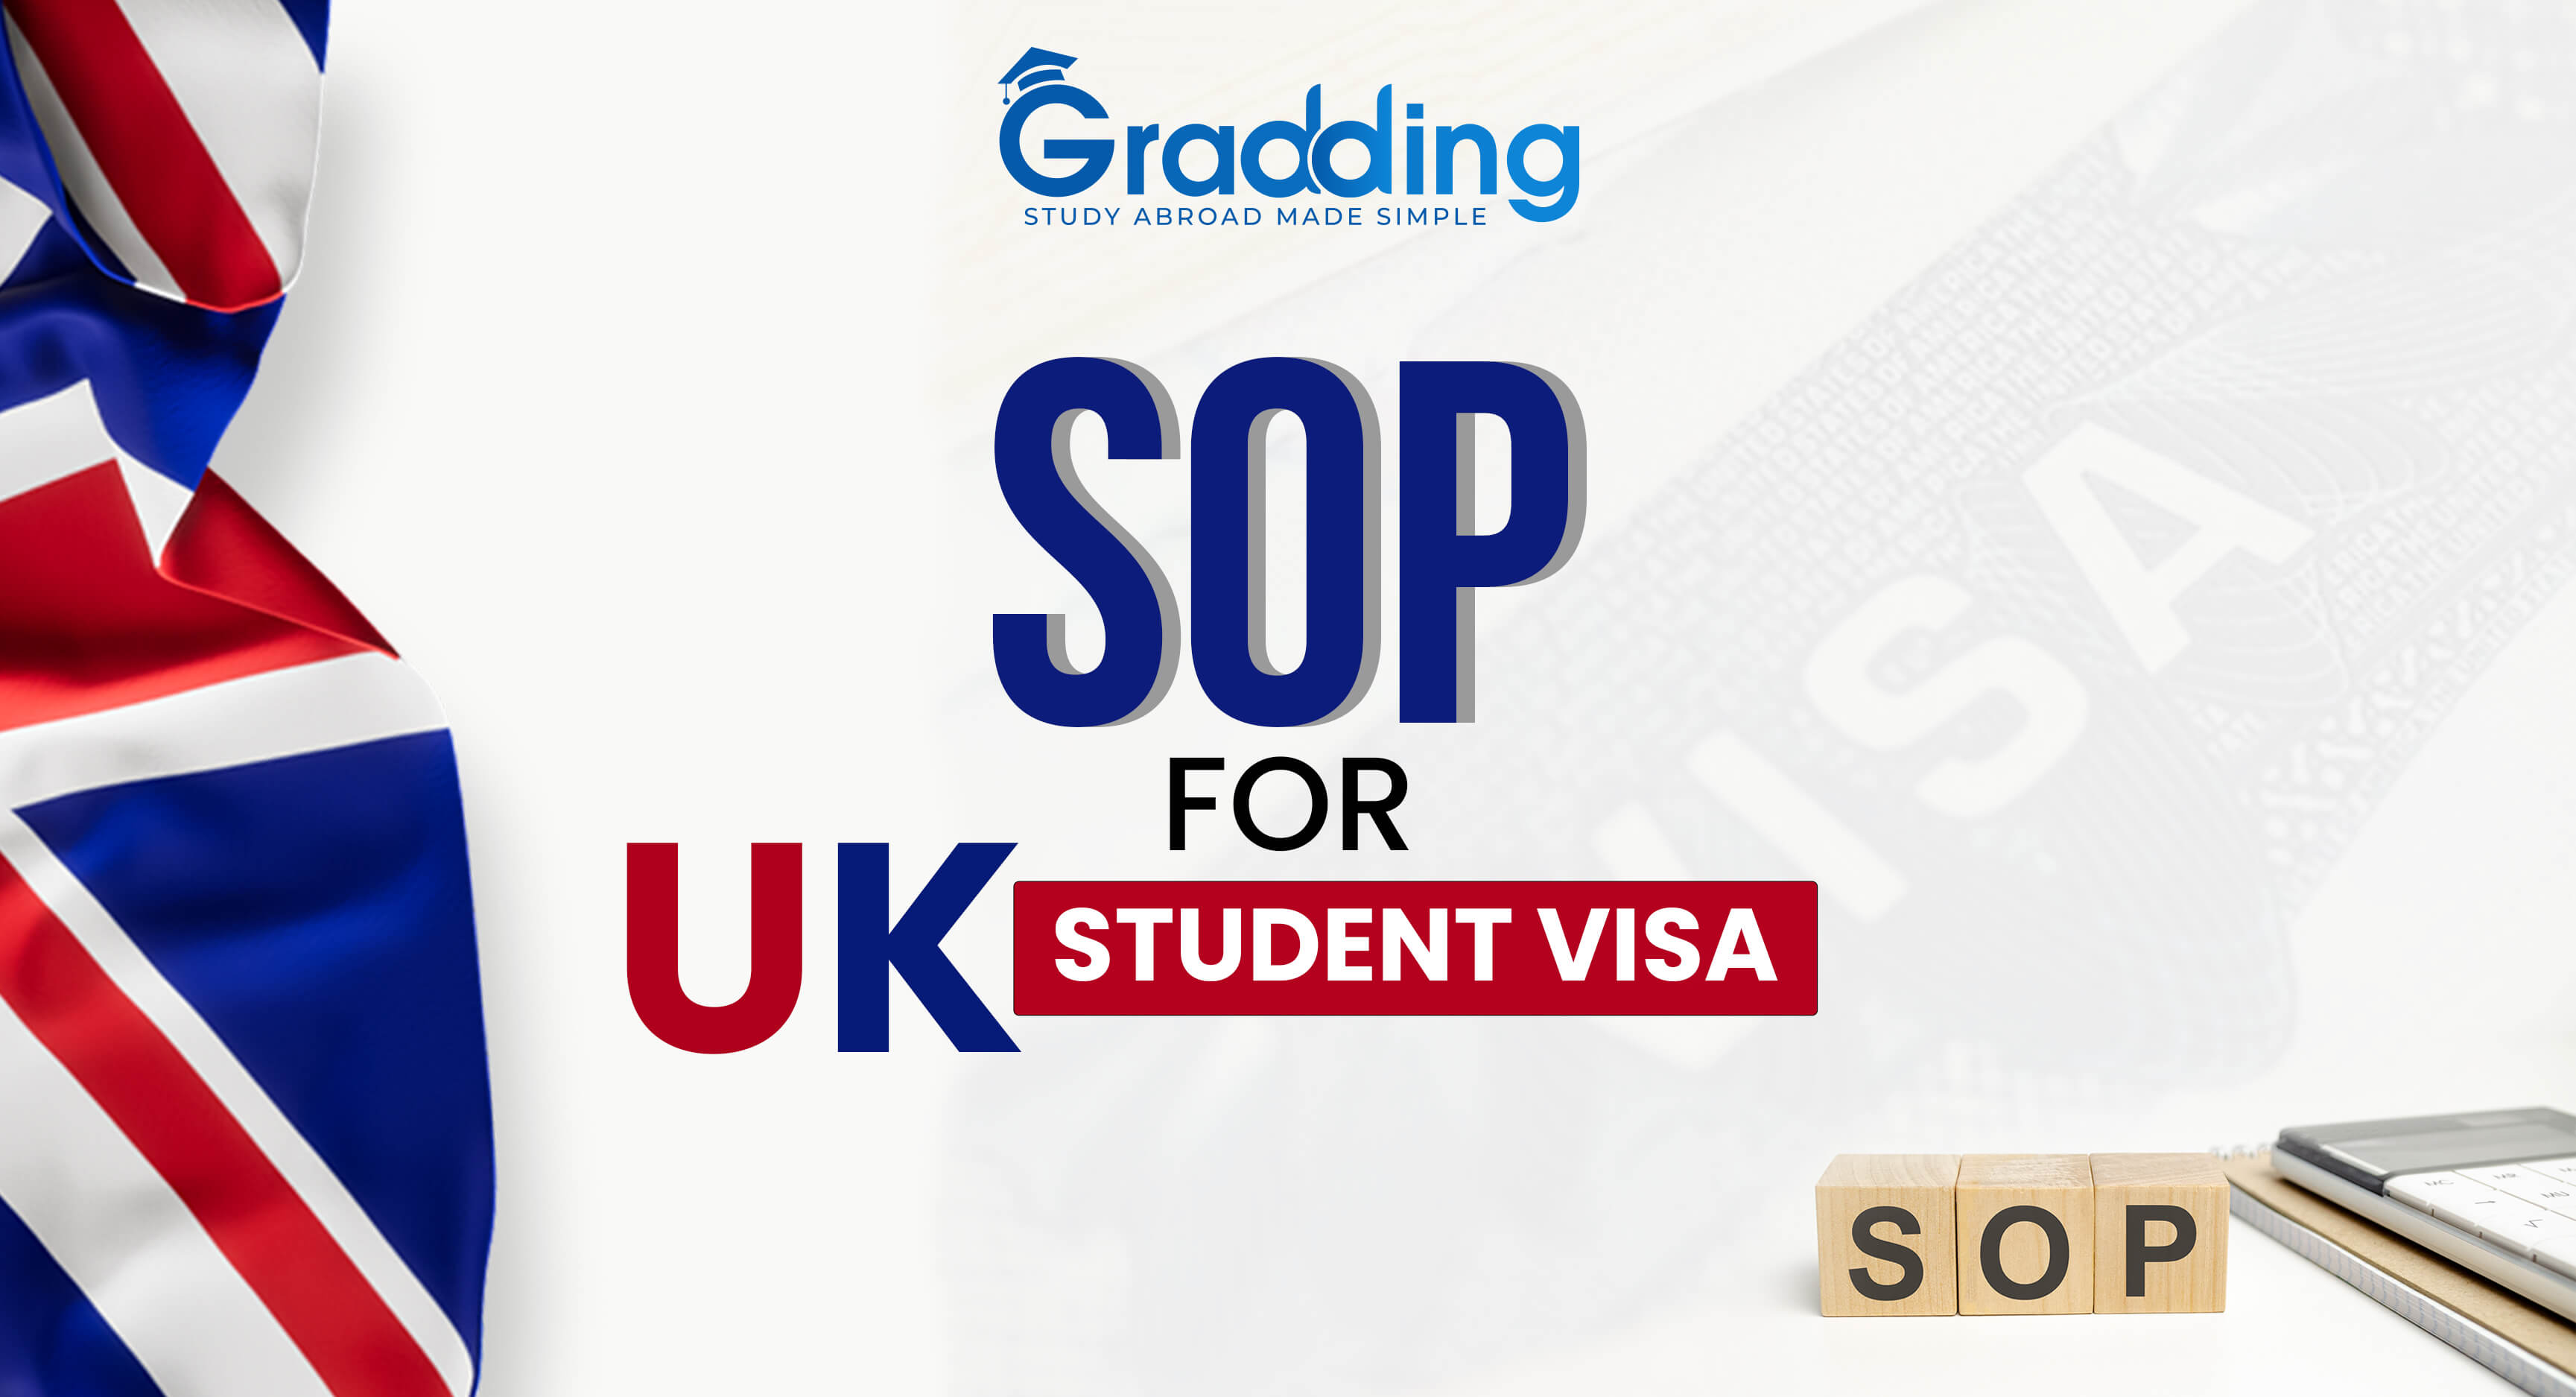 Tips by gradding.com on how to write an SOP for UK student visa